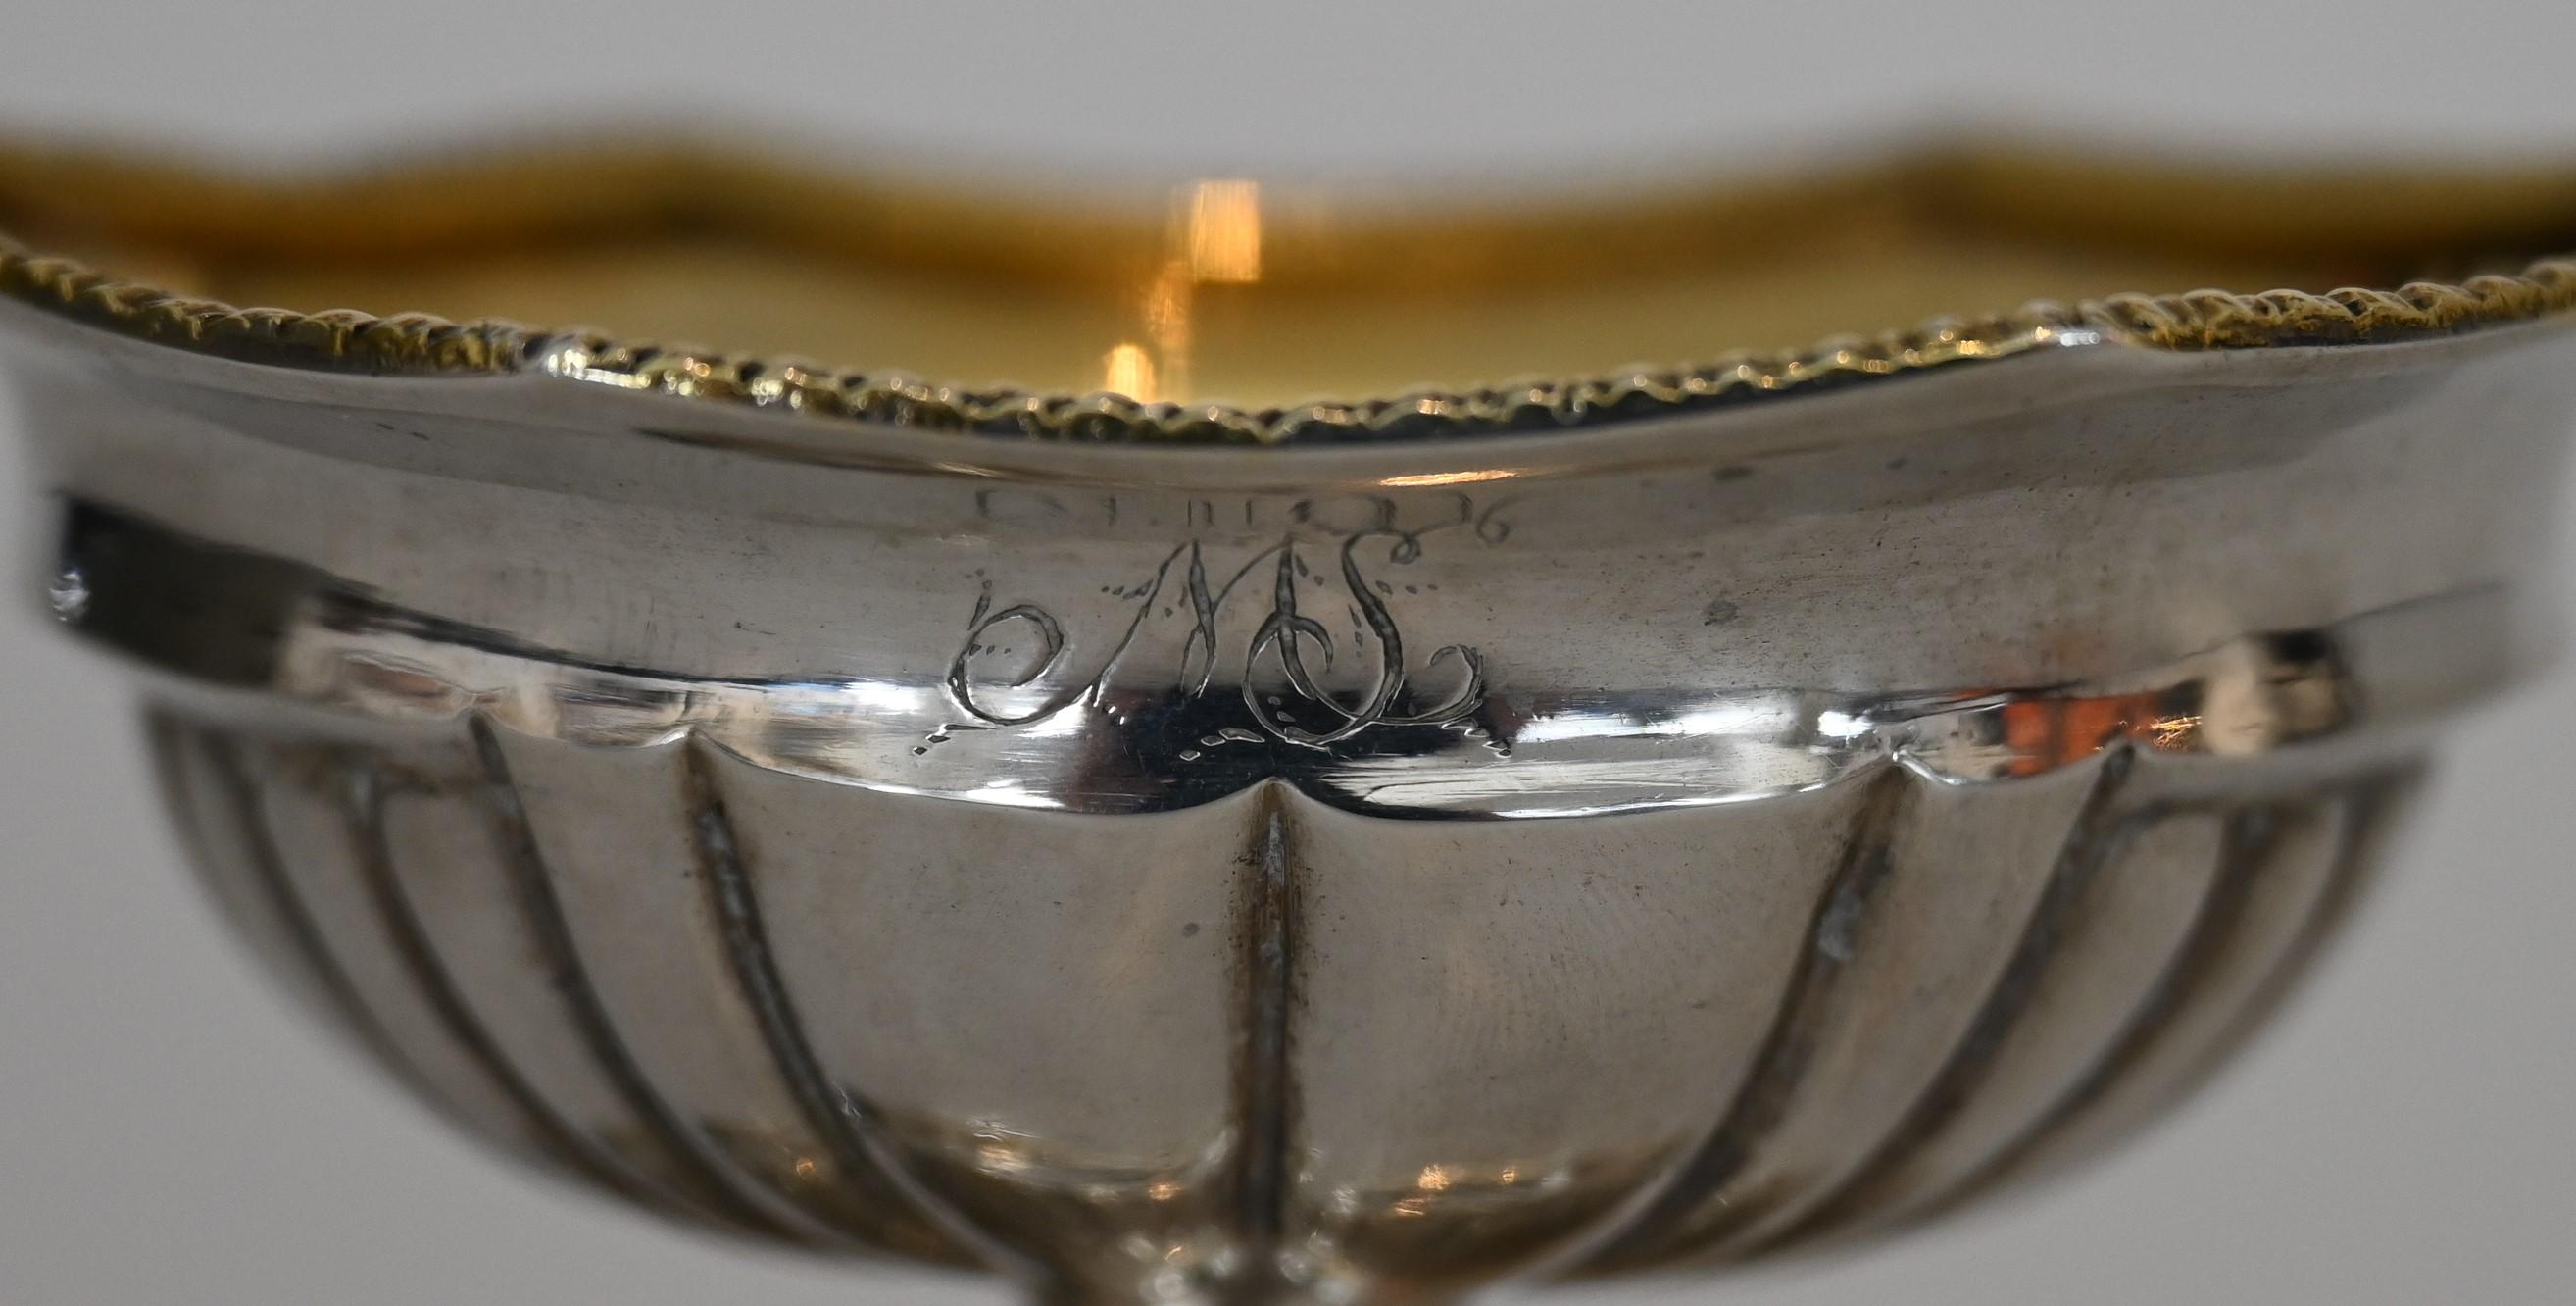 Finely crafted Saliere, solid silver and gold-plated
Petersburg 19th century 84 Zolotniki City hallmark: A.R.
Engraved monogram 